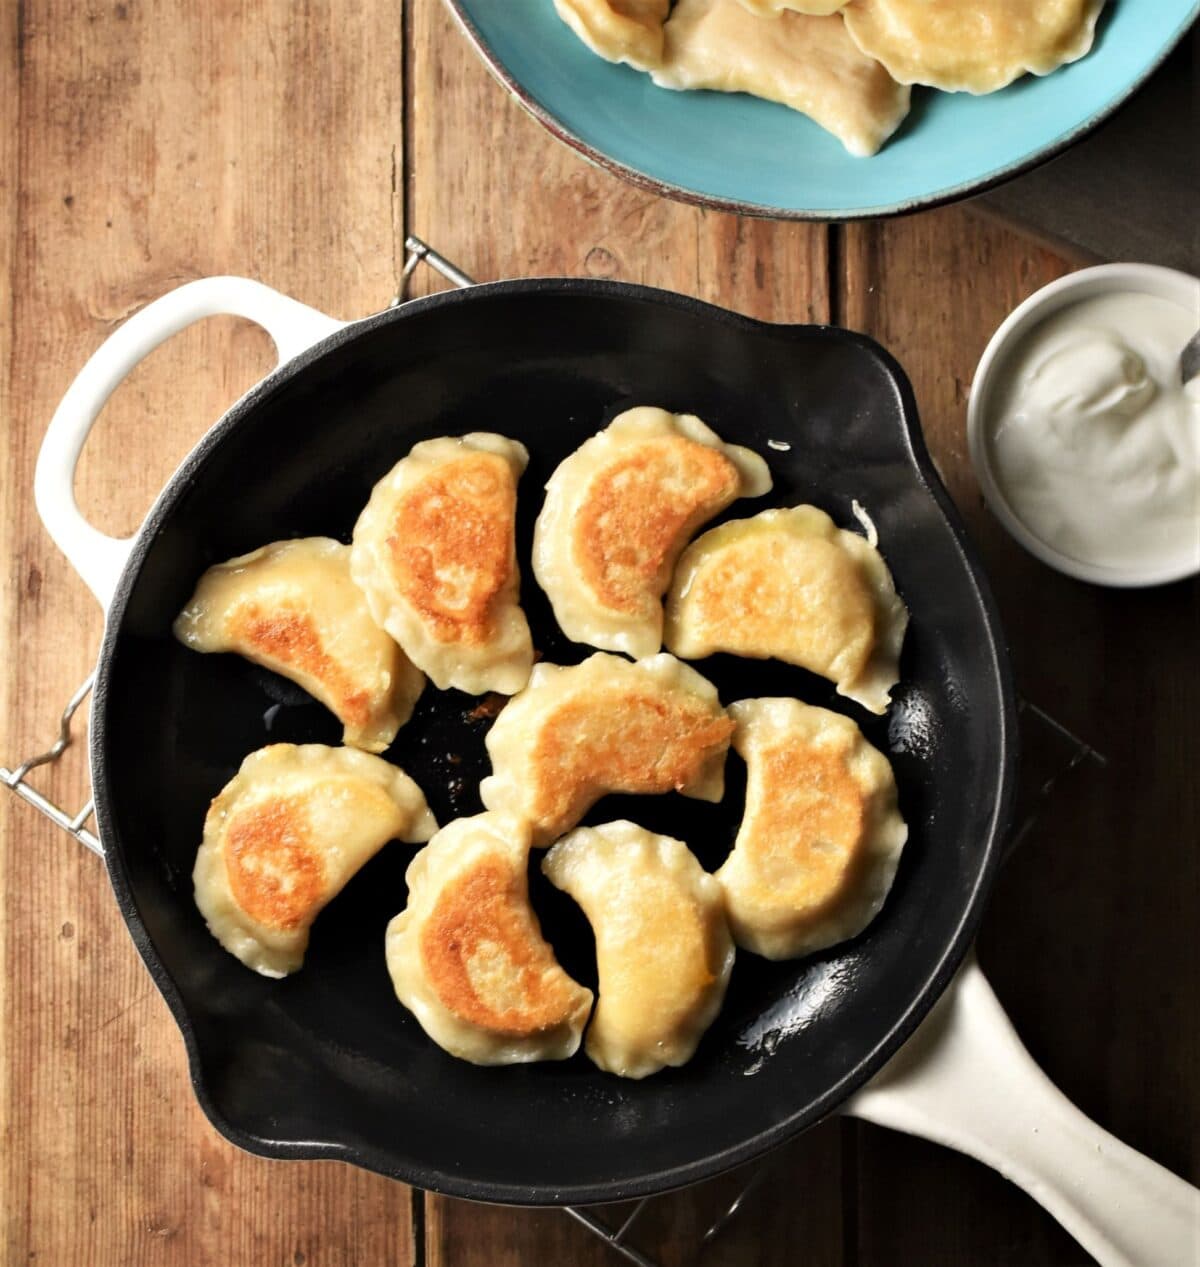 Top down view of fried perogies in skillet with yogurt in background.